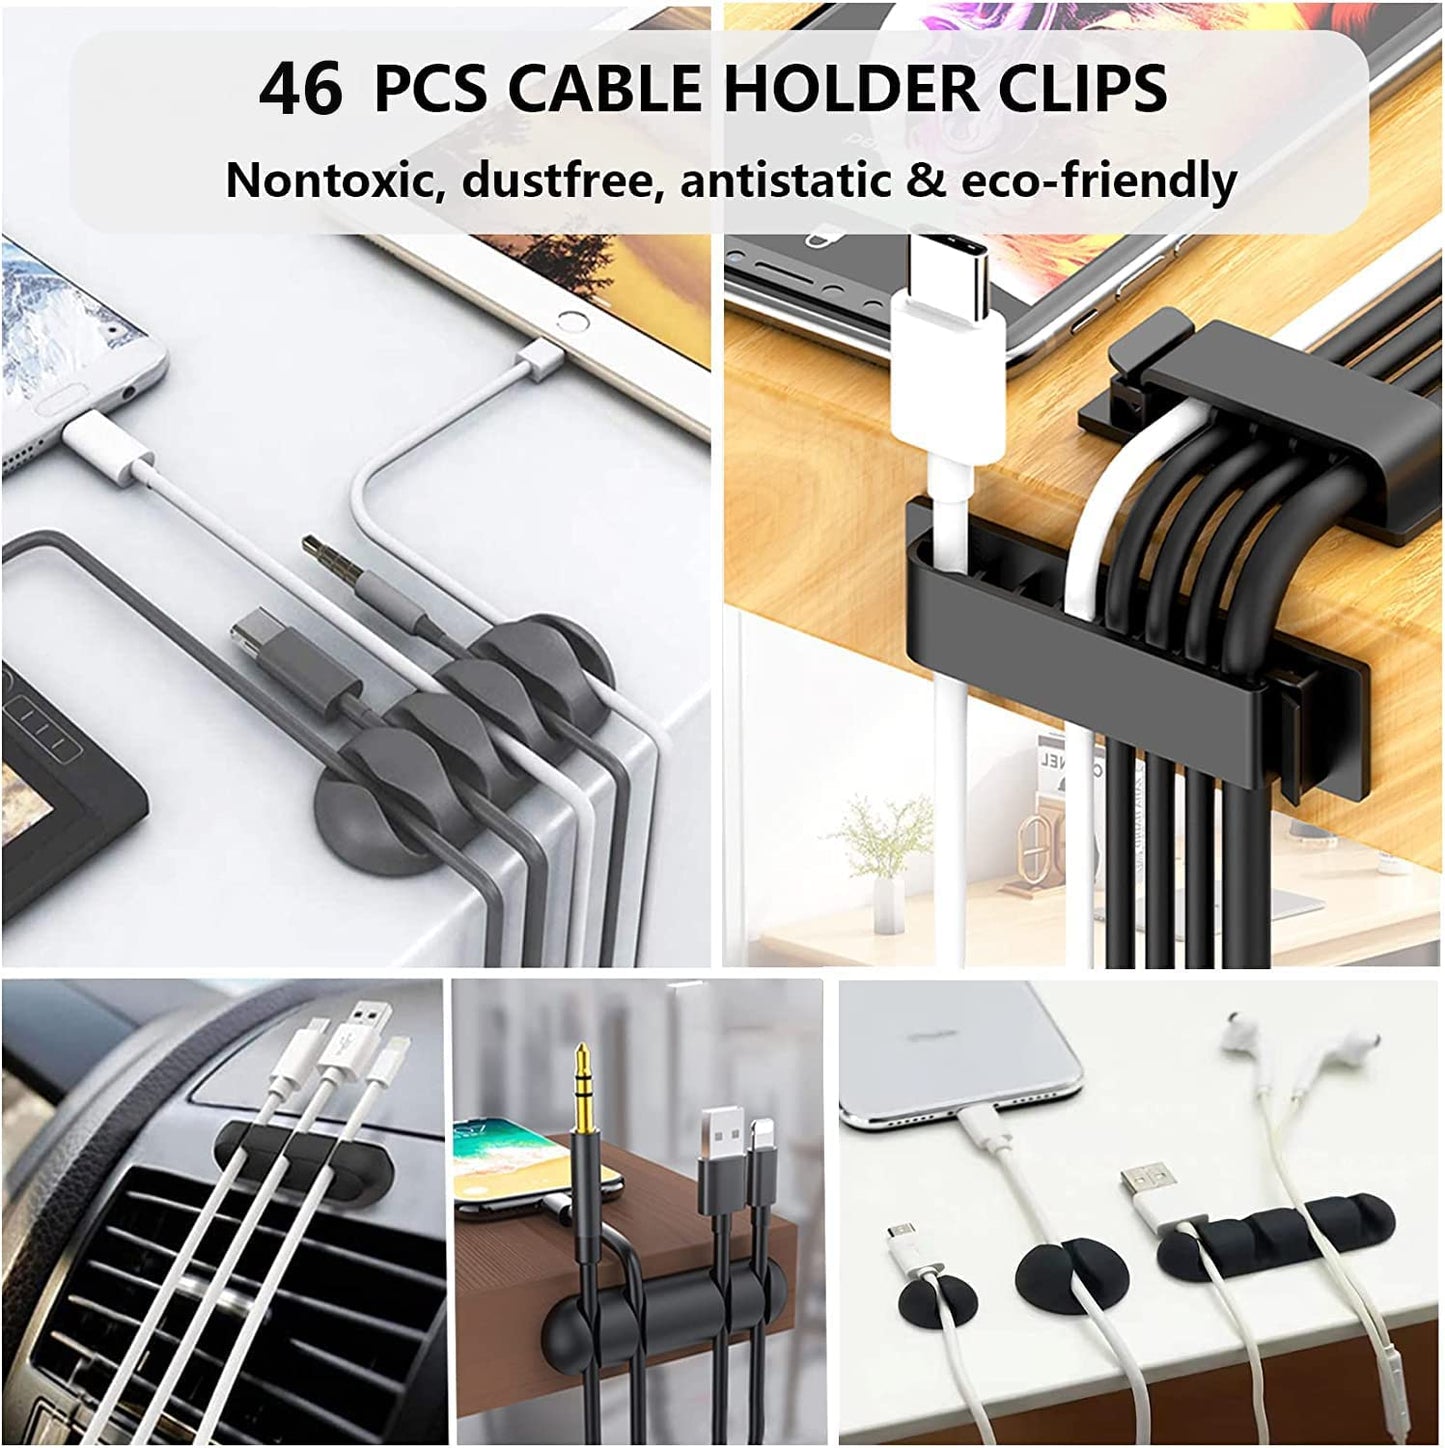 192 PCS Cable Management Kit 4 Wire Organizer Sleeve,11 Cable Holder,35Cord Clips 10+2 Roll Cable Organizer Straps and 100 Fastening Cable Ties for Computer TV under Desk, Black,Clear